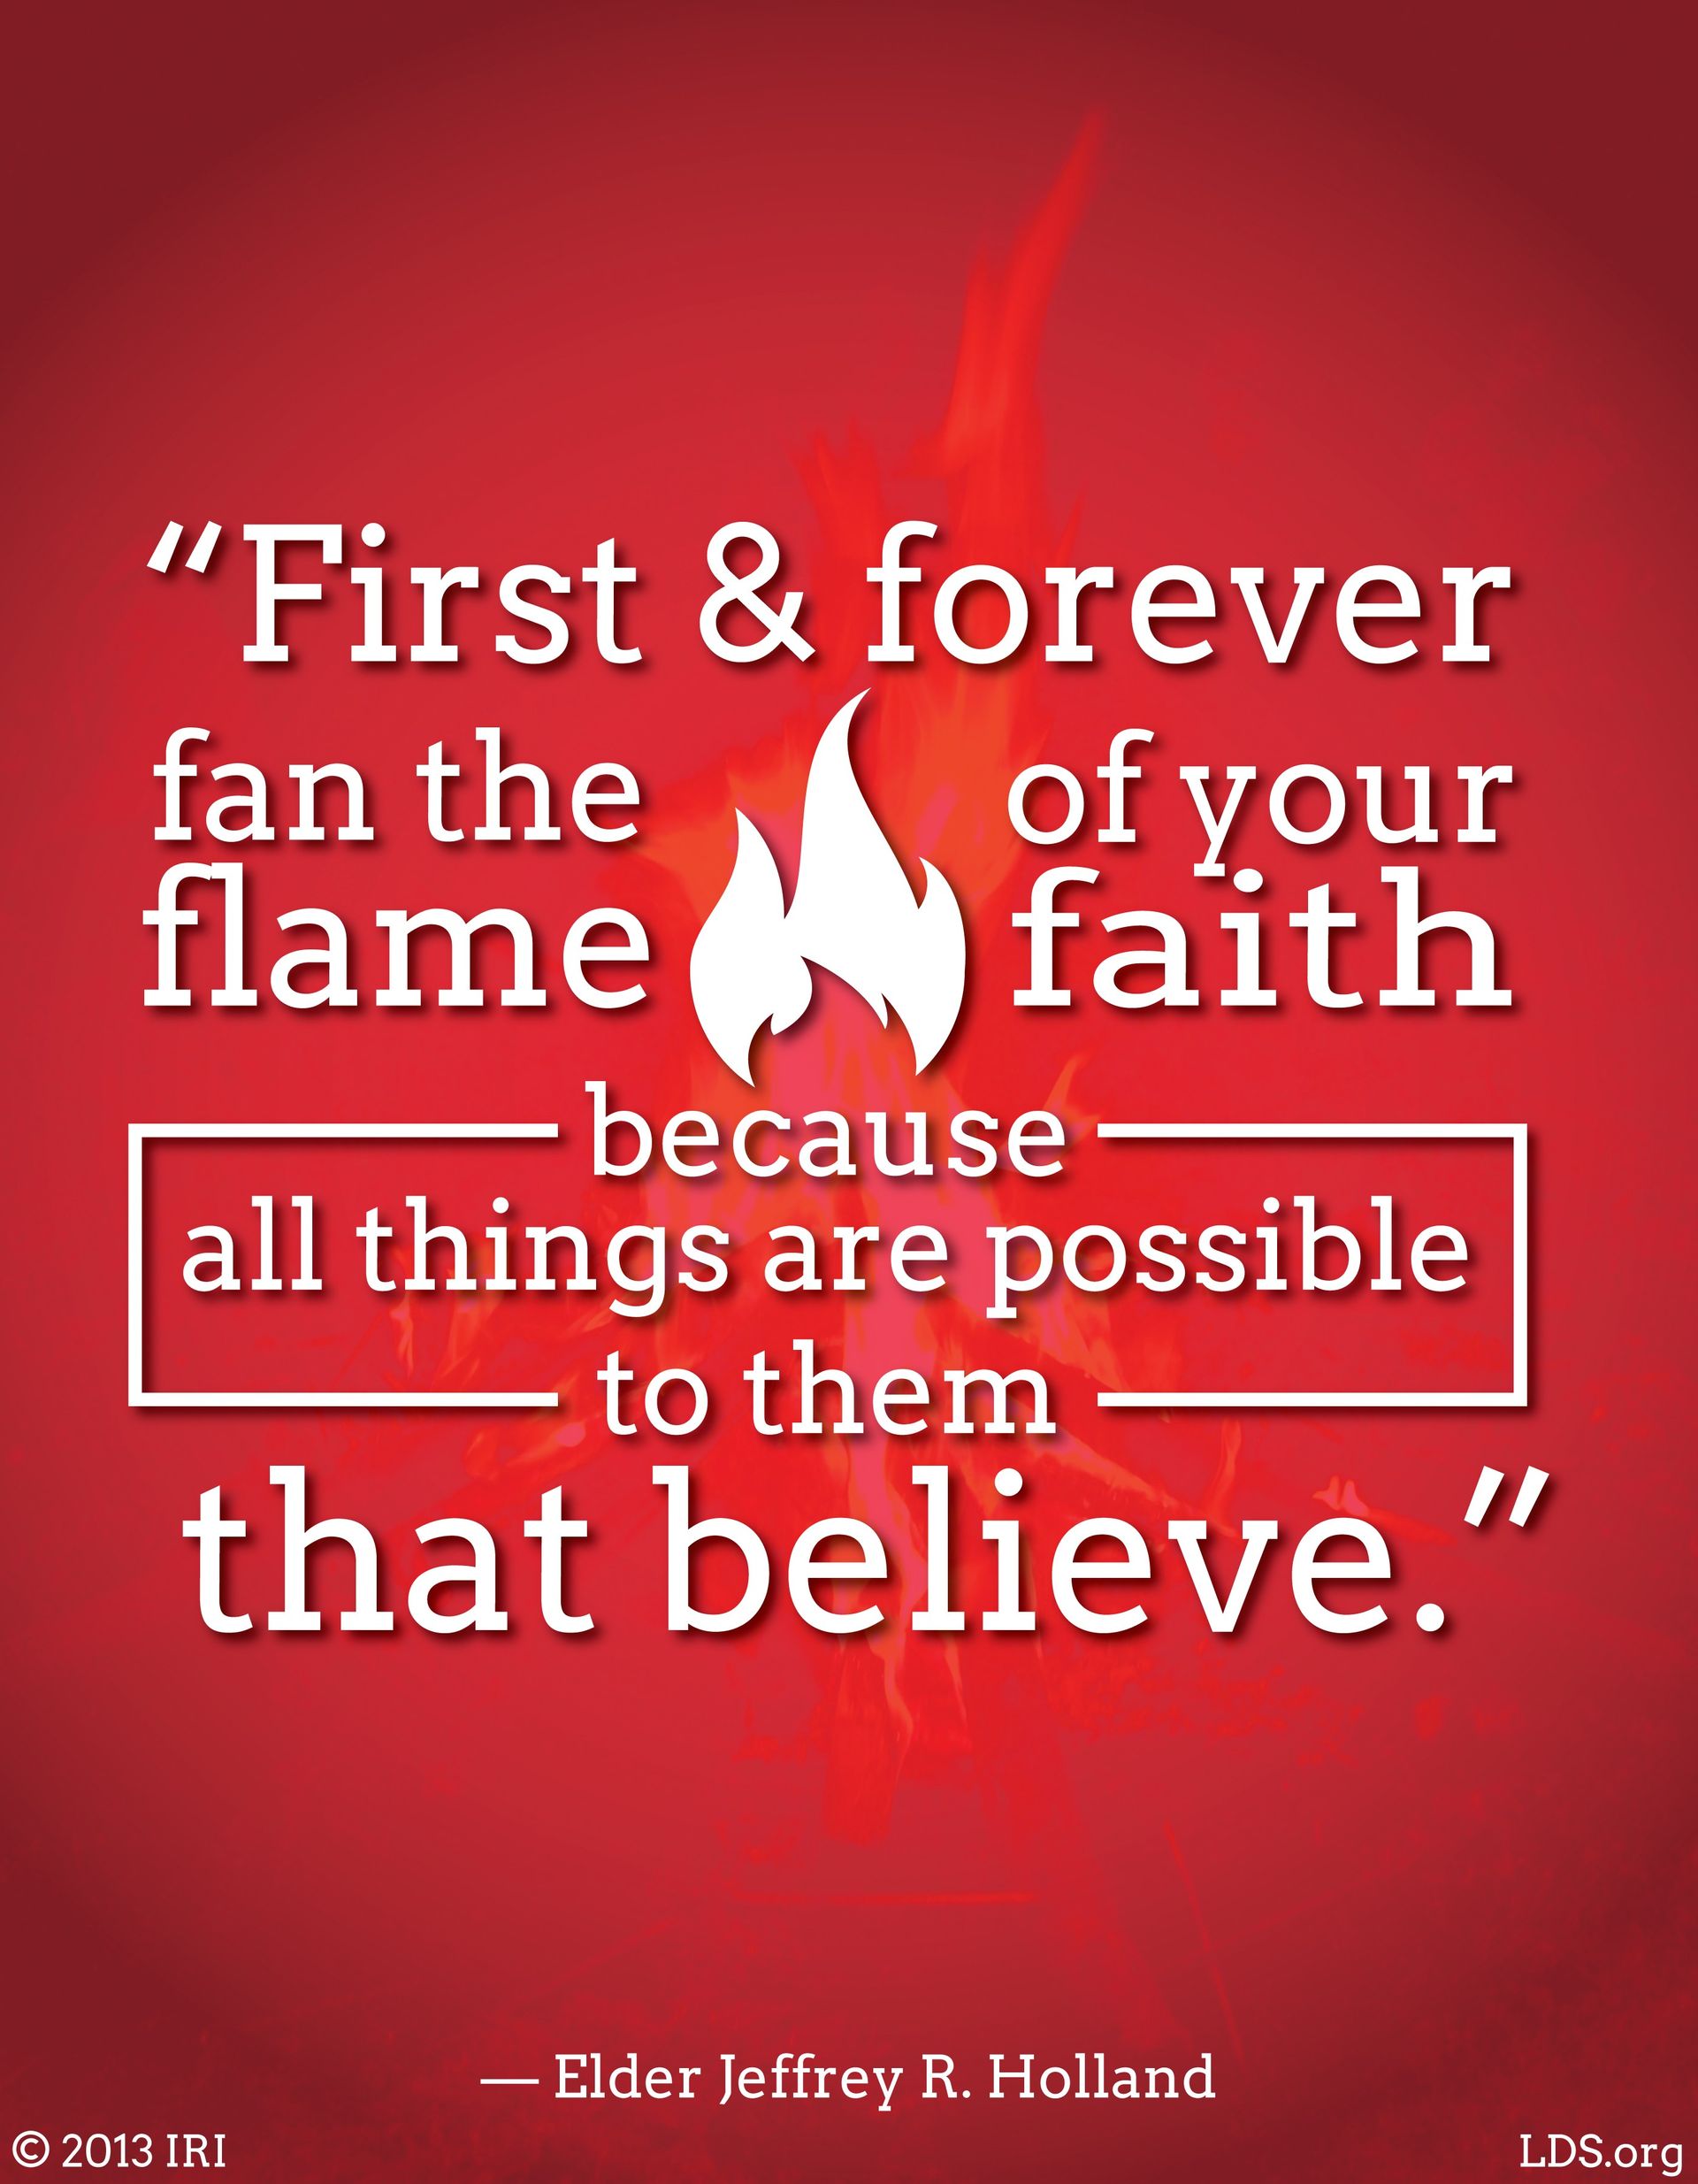 “First and forever fan the flame of your faith, because all things are possible to them that believe.”—Elder Jeffrey R. Holland, “Lord, I Believe” © undefined ipCode 1.